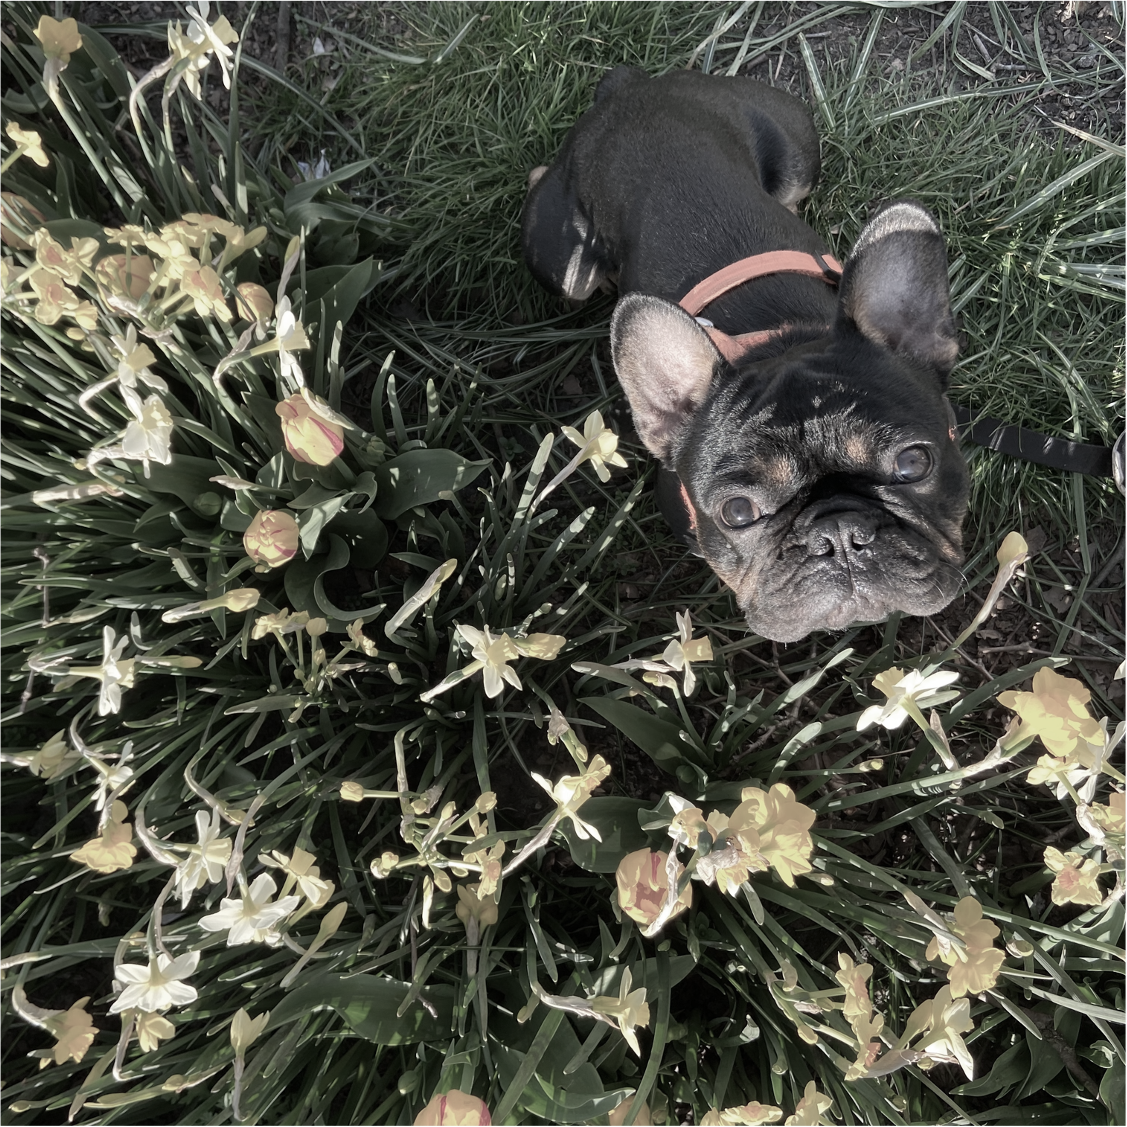 Ralph with flowers